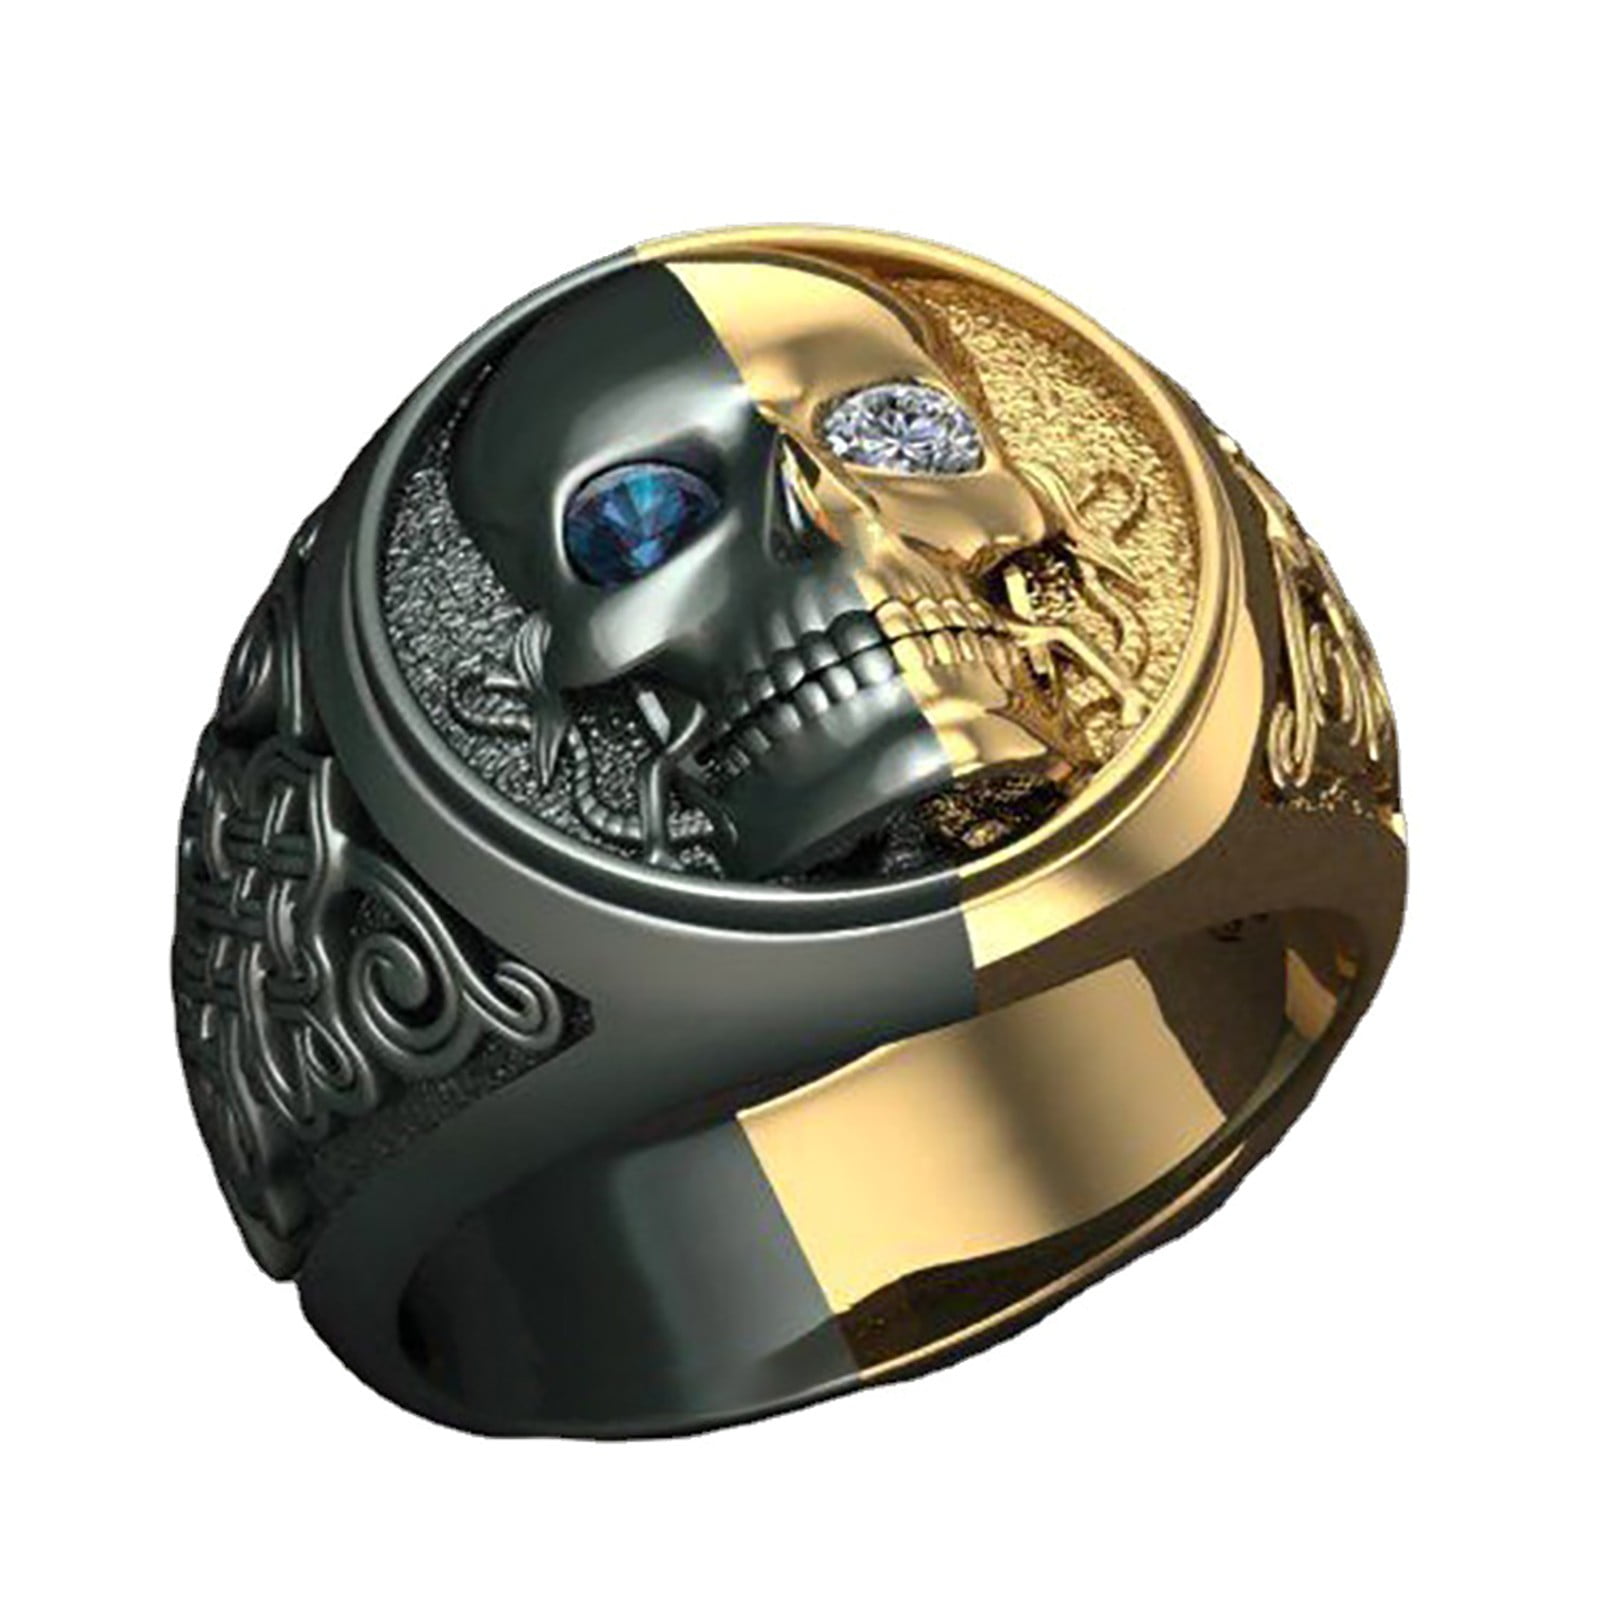 Silver skull ring solid stainless steel band soft gothic 